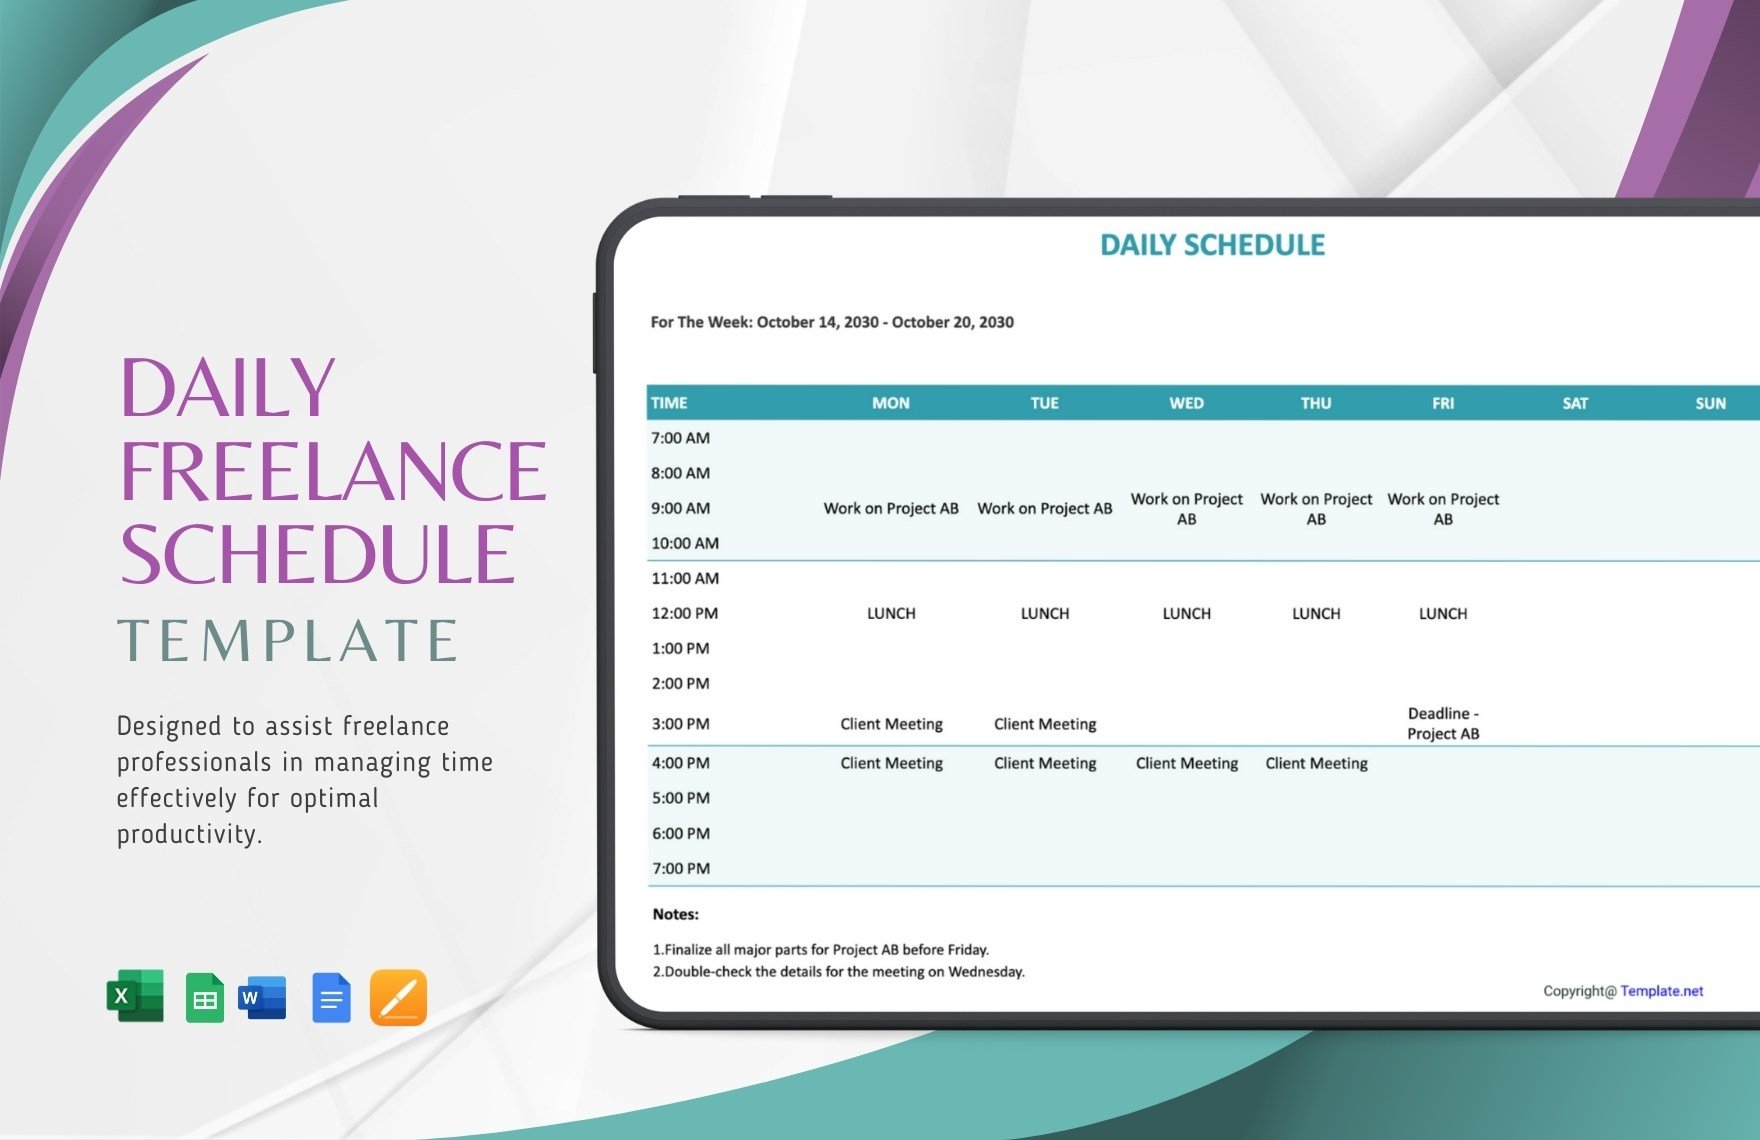 Daily Freelance Schedule Template in Word, Google Docs, Excel, Google Sheets, Apple Pages